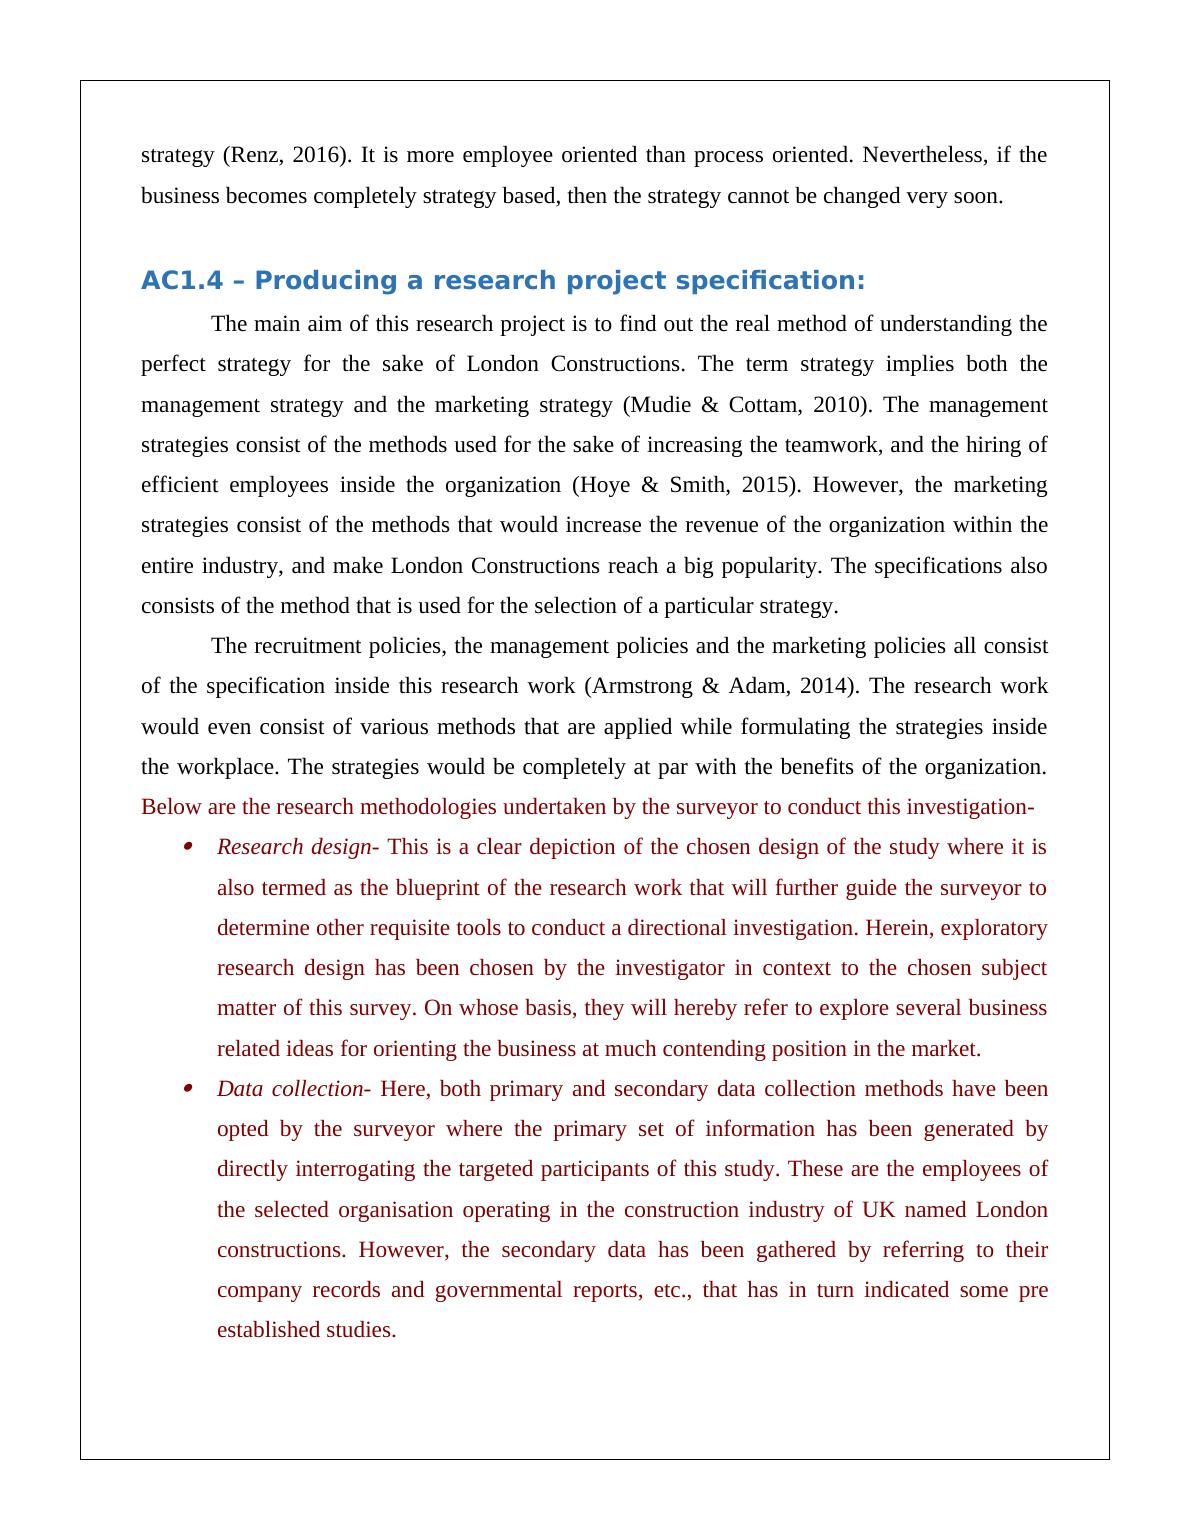 LO1: Formulation and Implementation of the Research Project 6_4